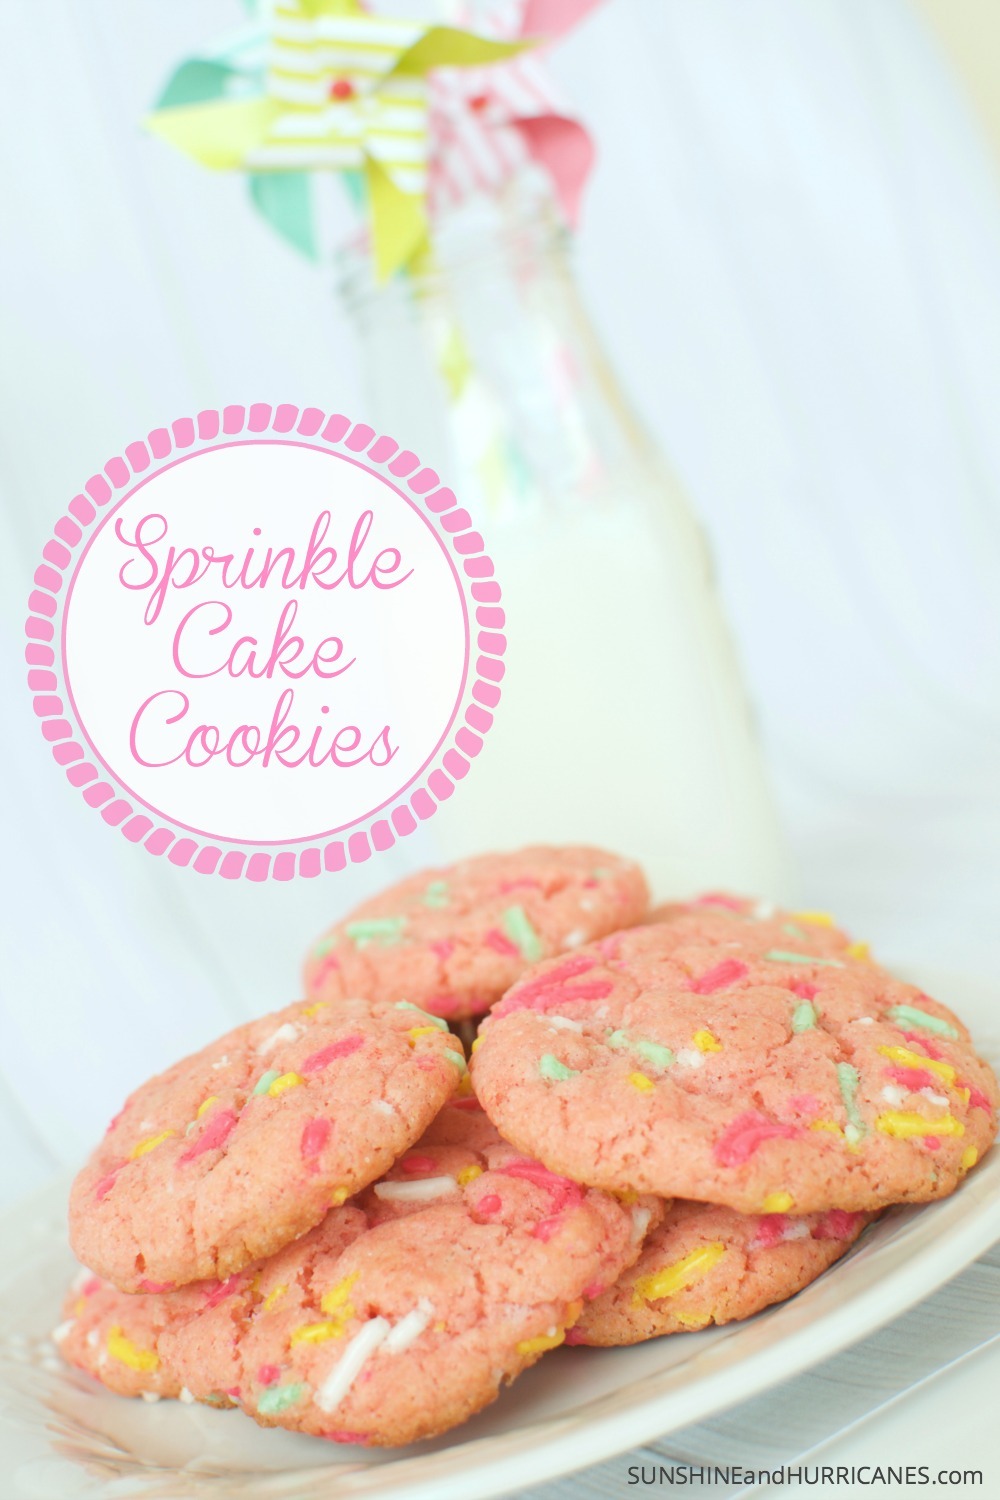 Looking for a quick and easy cookie recipe for a class party, bake sale or even a princess tea party? These tasty cake box cookies are so easy to make and can even be customize to your own tastes or even a theme. Bake them together with your kids or they are even easy enough for older kids to make themselves. Sprinkle Cake Cookies. SunshineandHurricanes.com